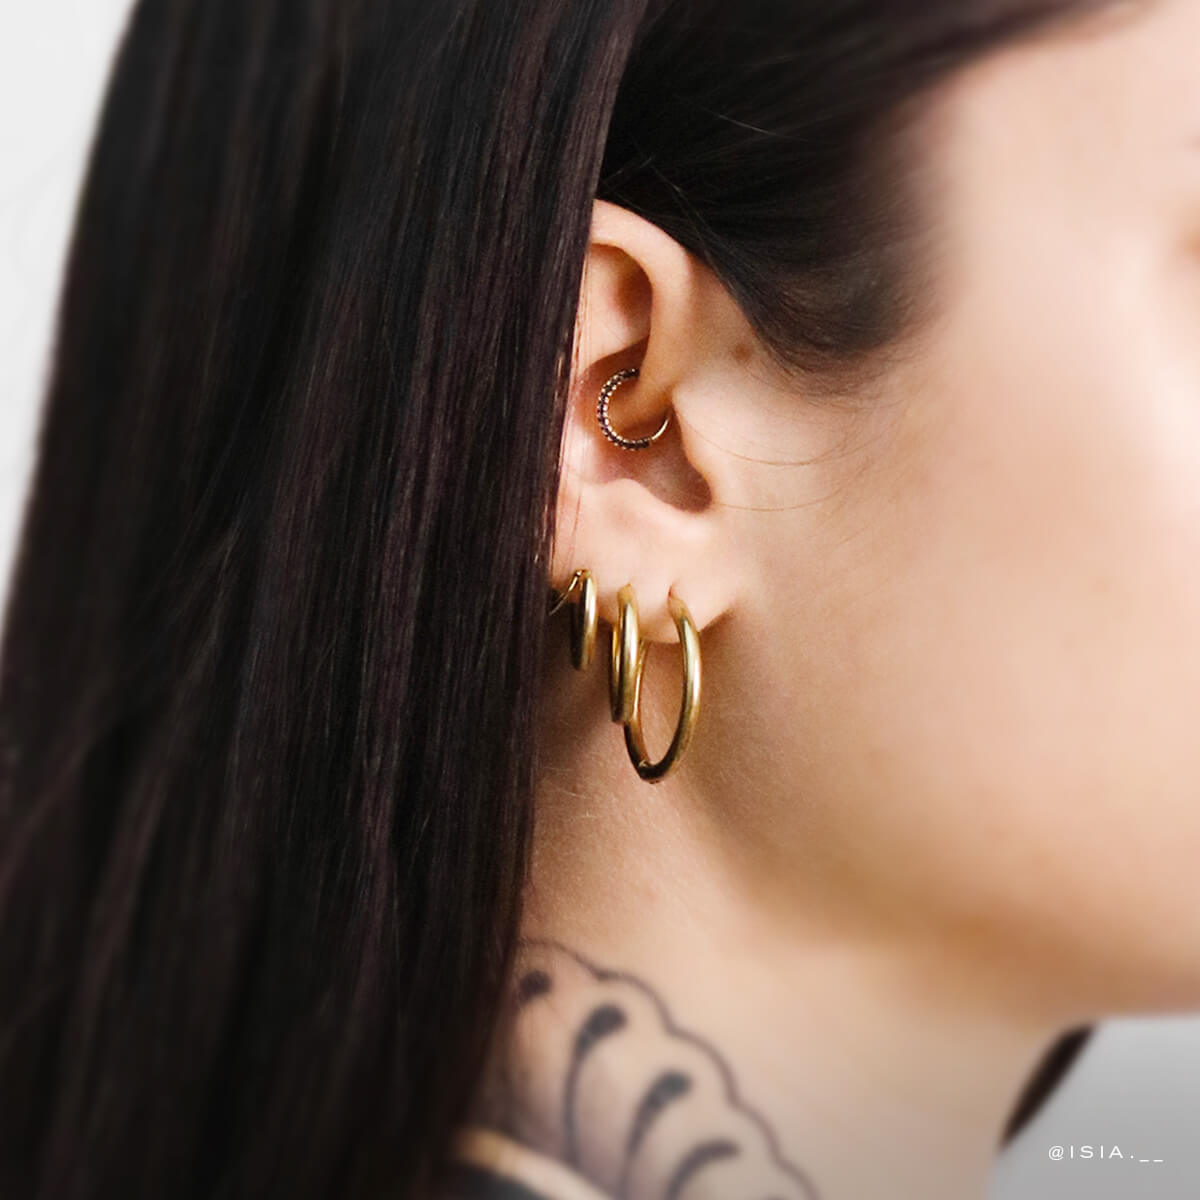 Mid Hoop Earrings in Gold Colour Round Thick Golden Hoops 